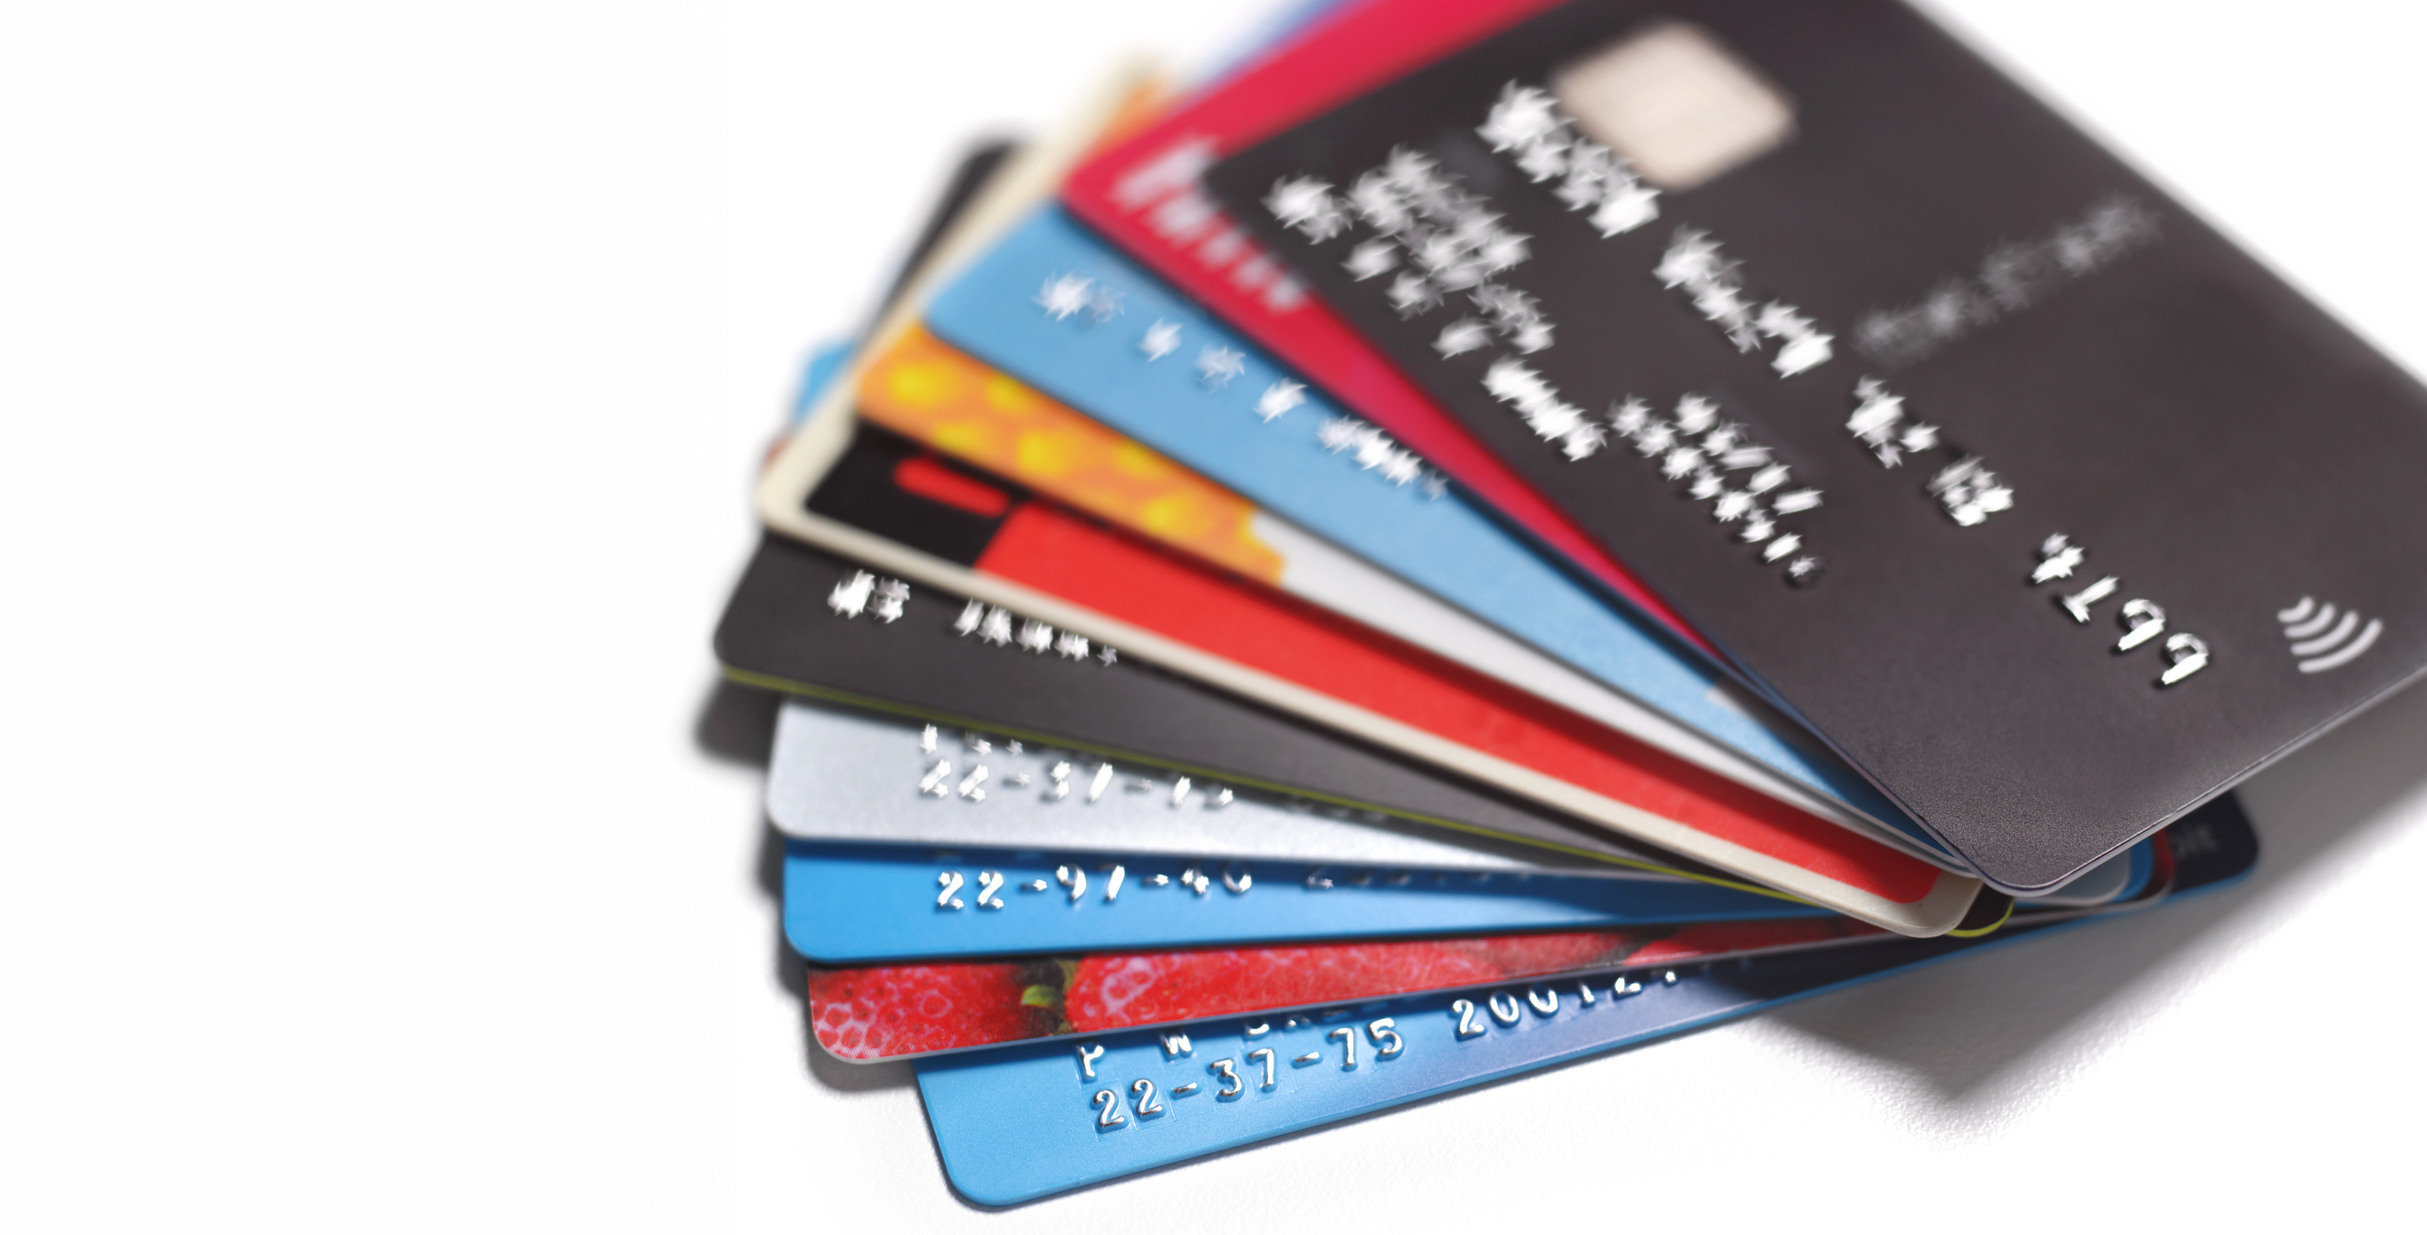 fanned out credit cards